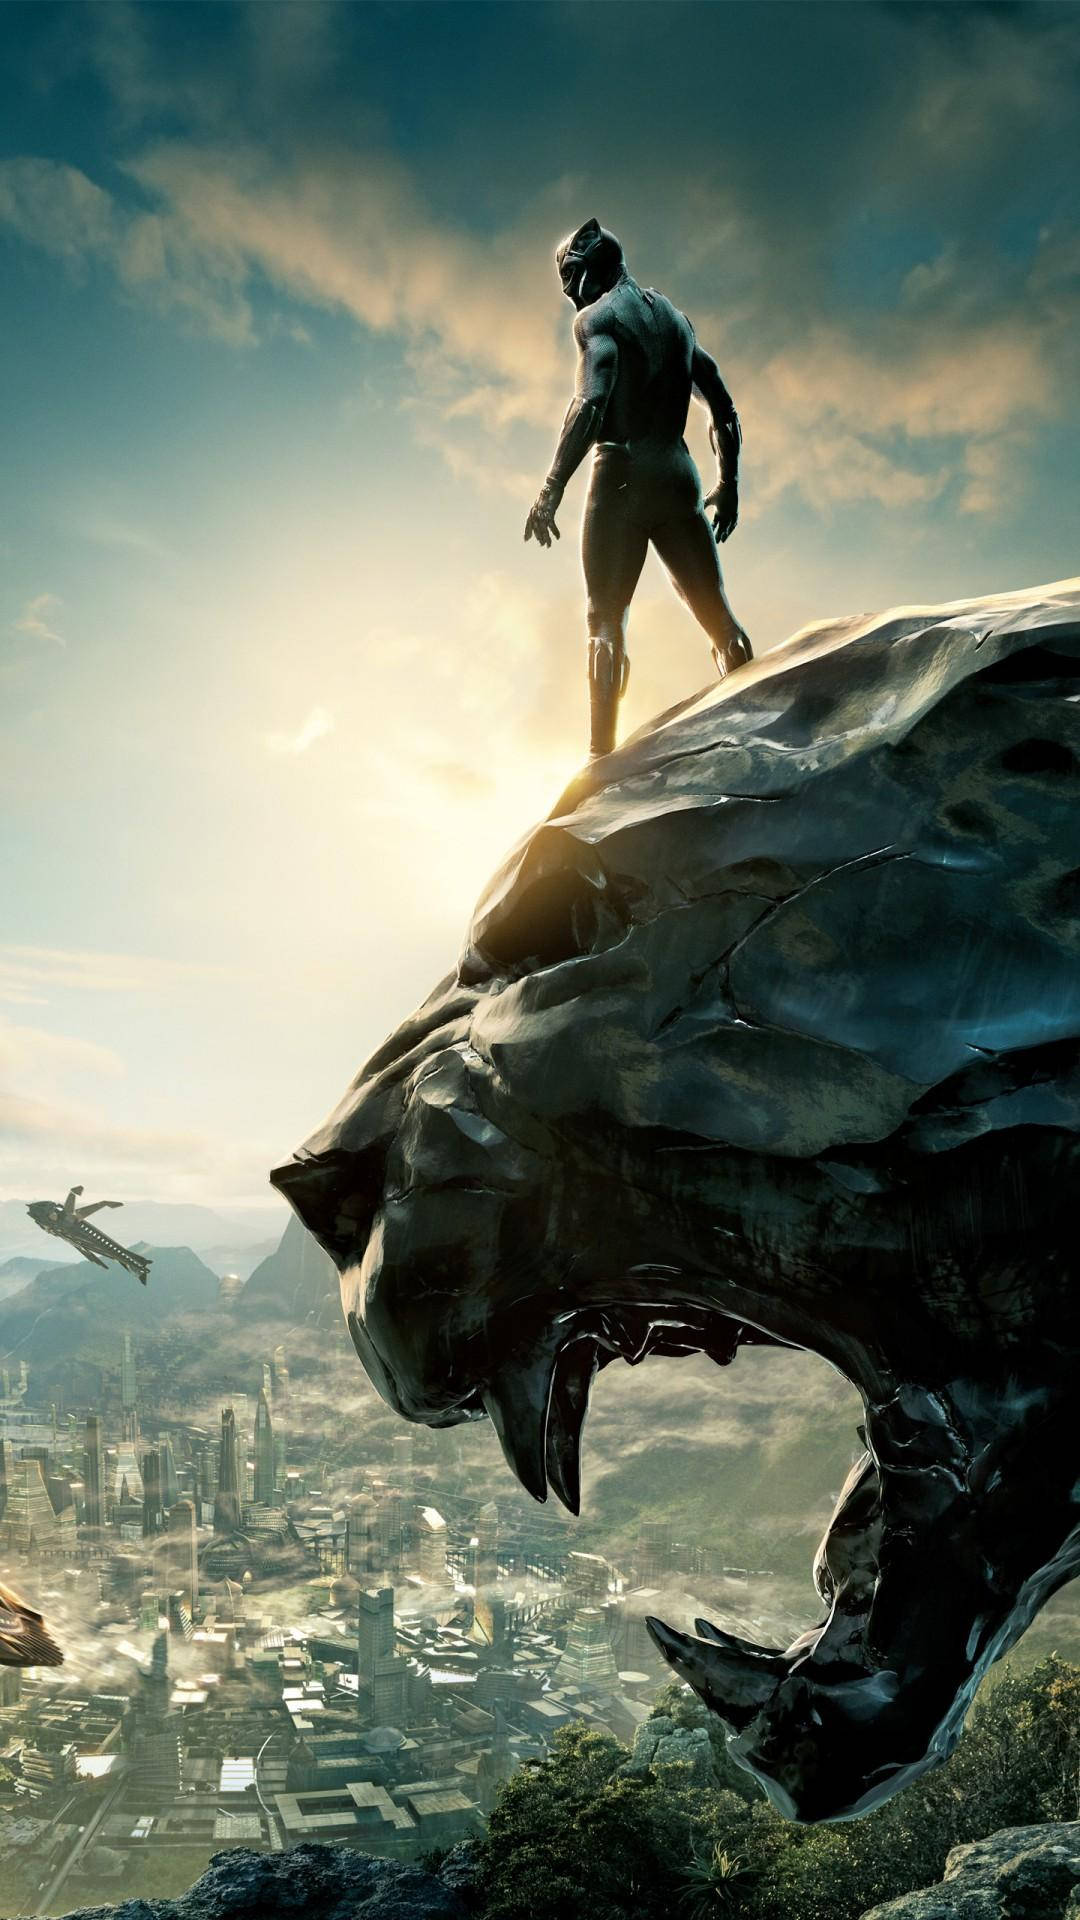 Panther Statue And Black Panther Android